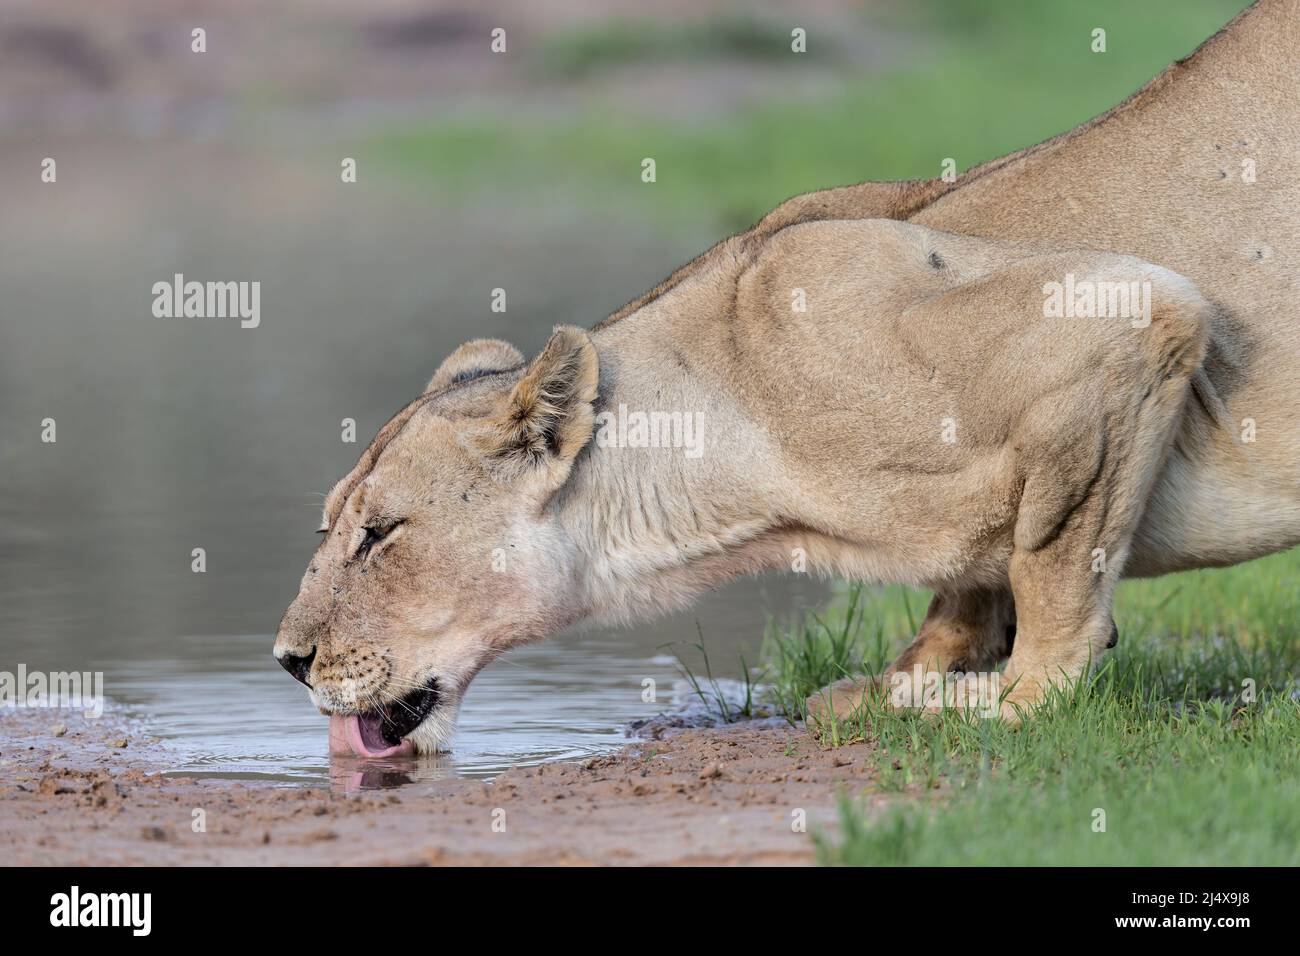 Lioness (Panthera leo) drinking, Kgalagadi transfrontier park, Northern Cape, South Africa Stock Photo